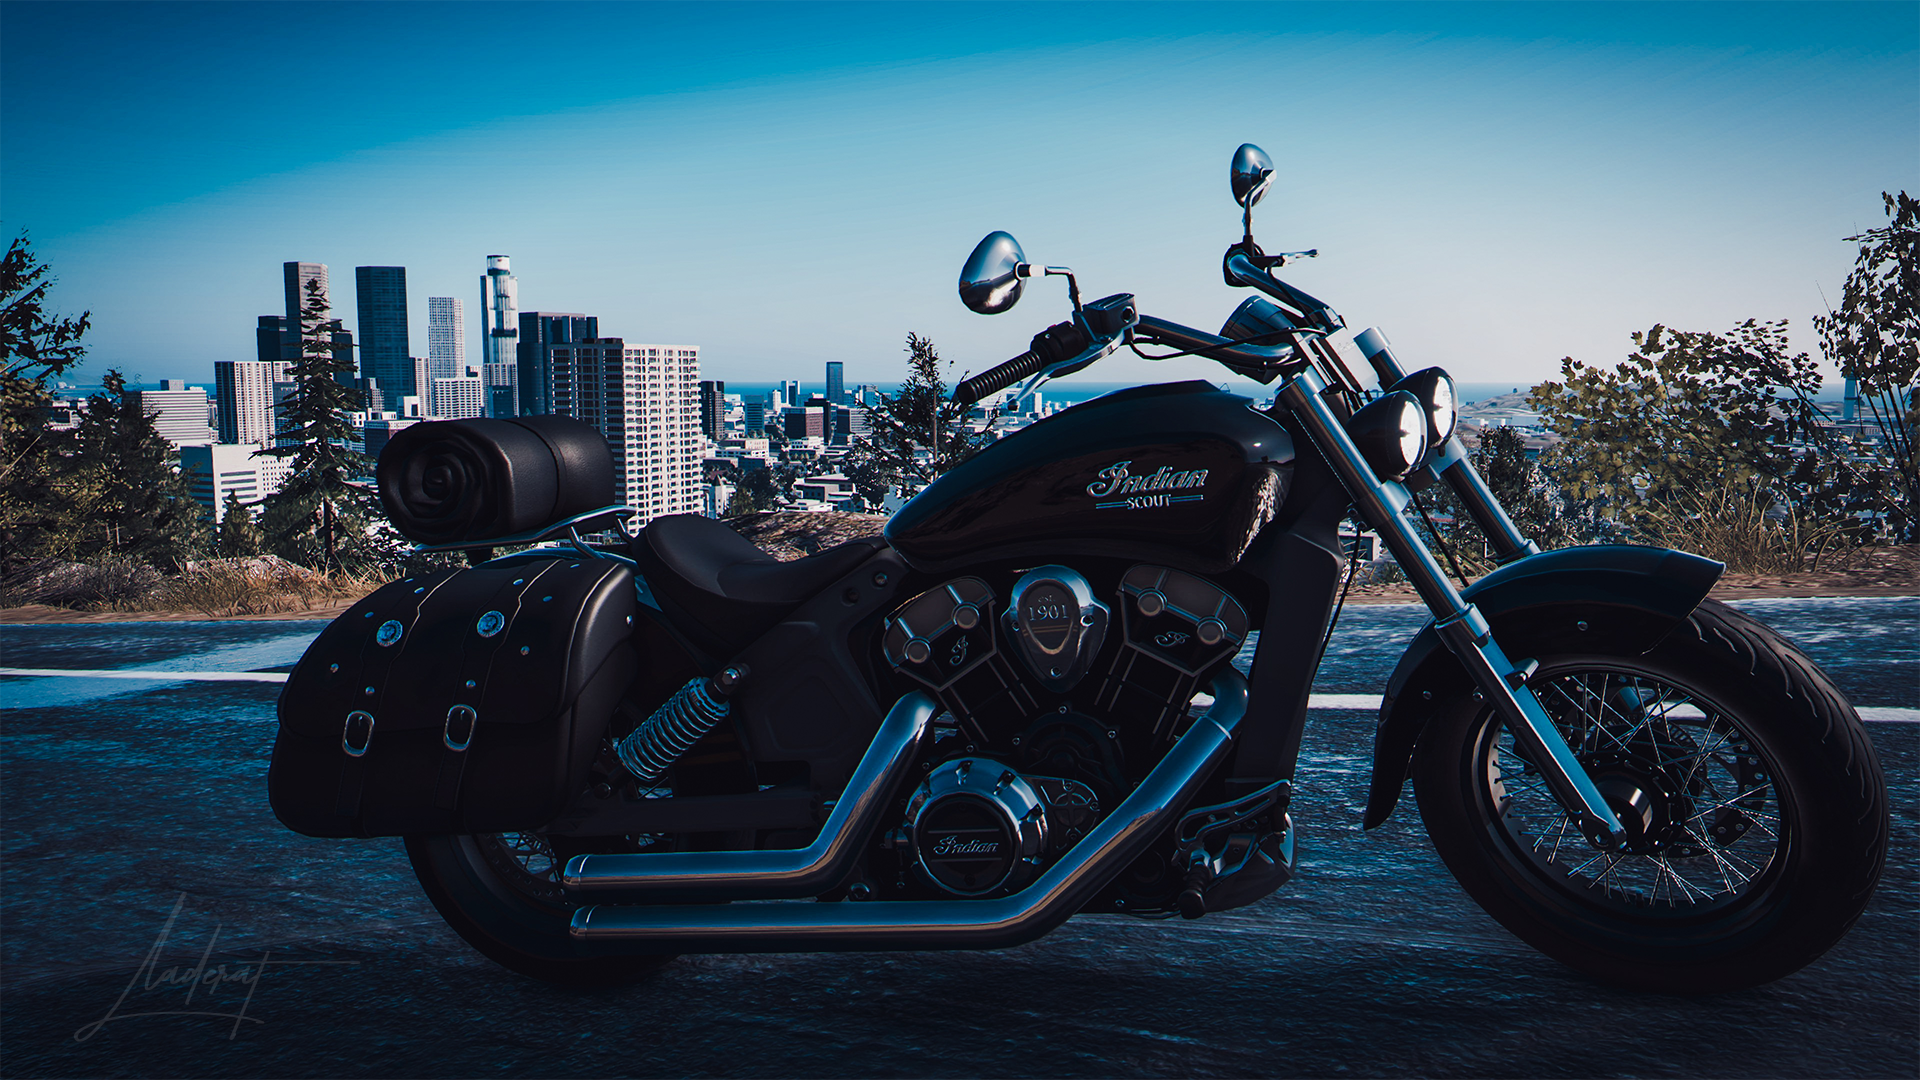 Motobike Motorcycle Indian Scout Vecicle Black The Crew 2 1920x1080